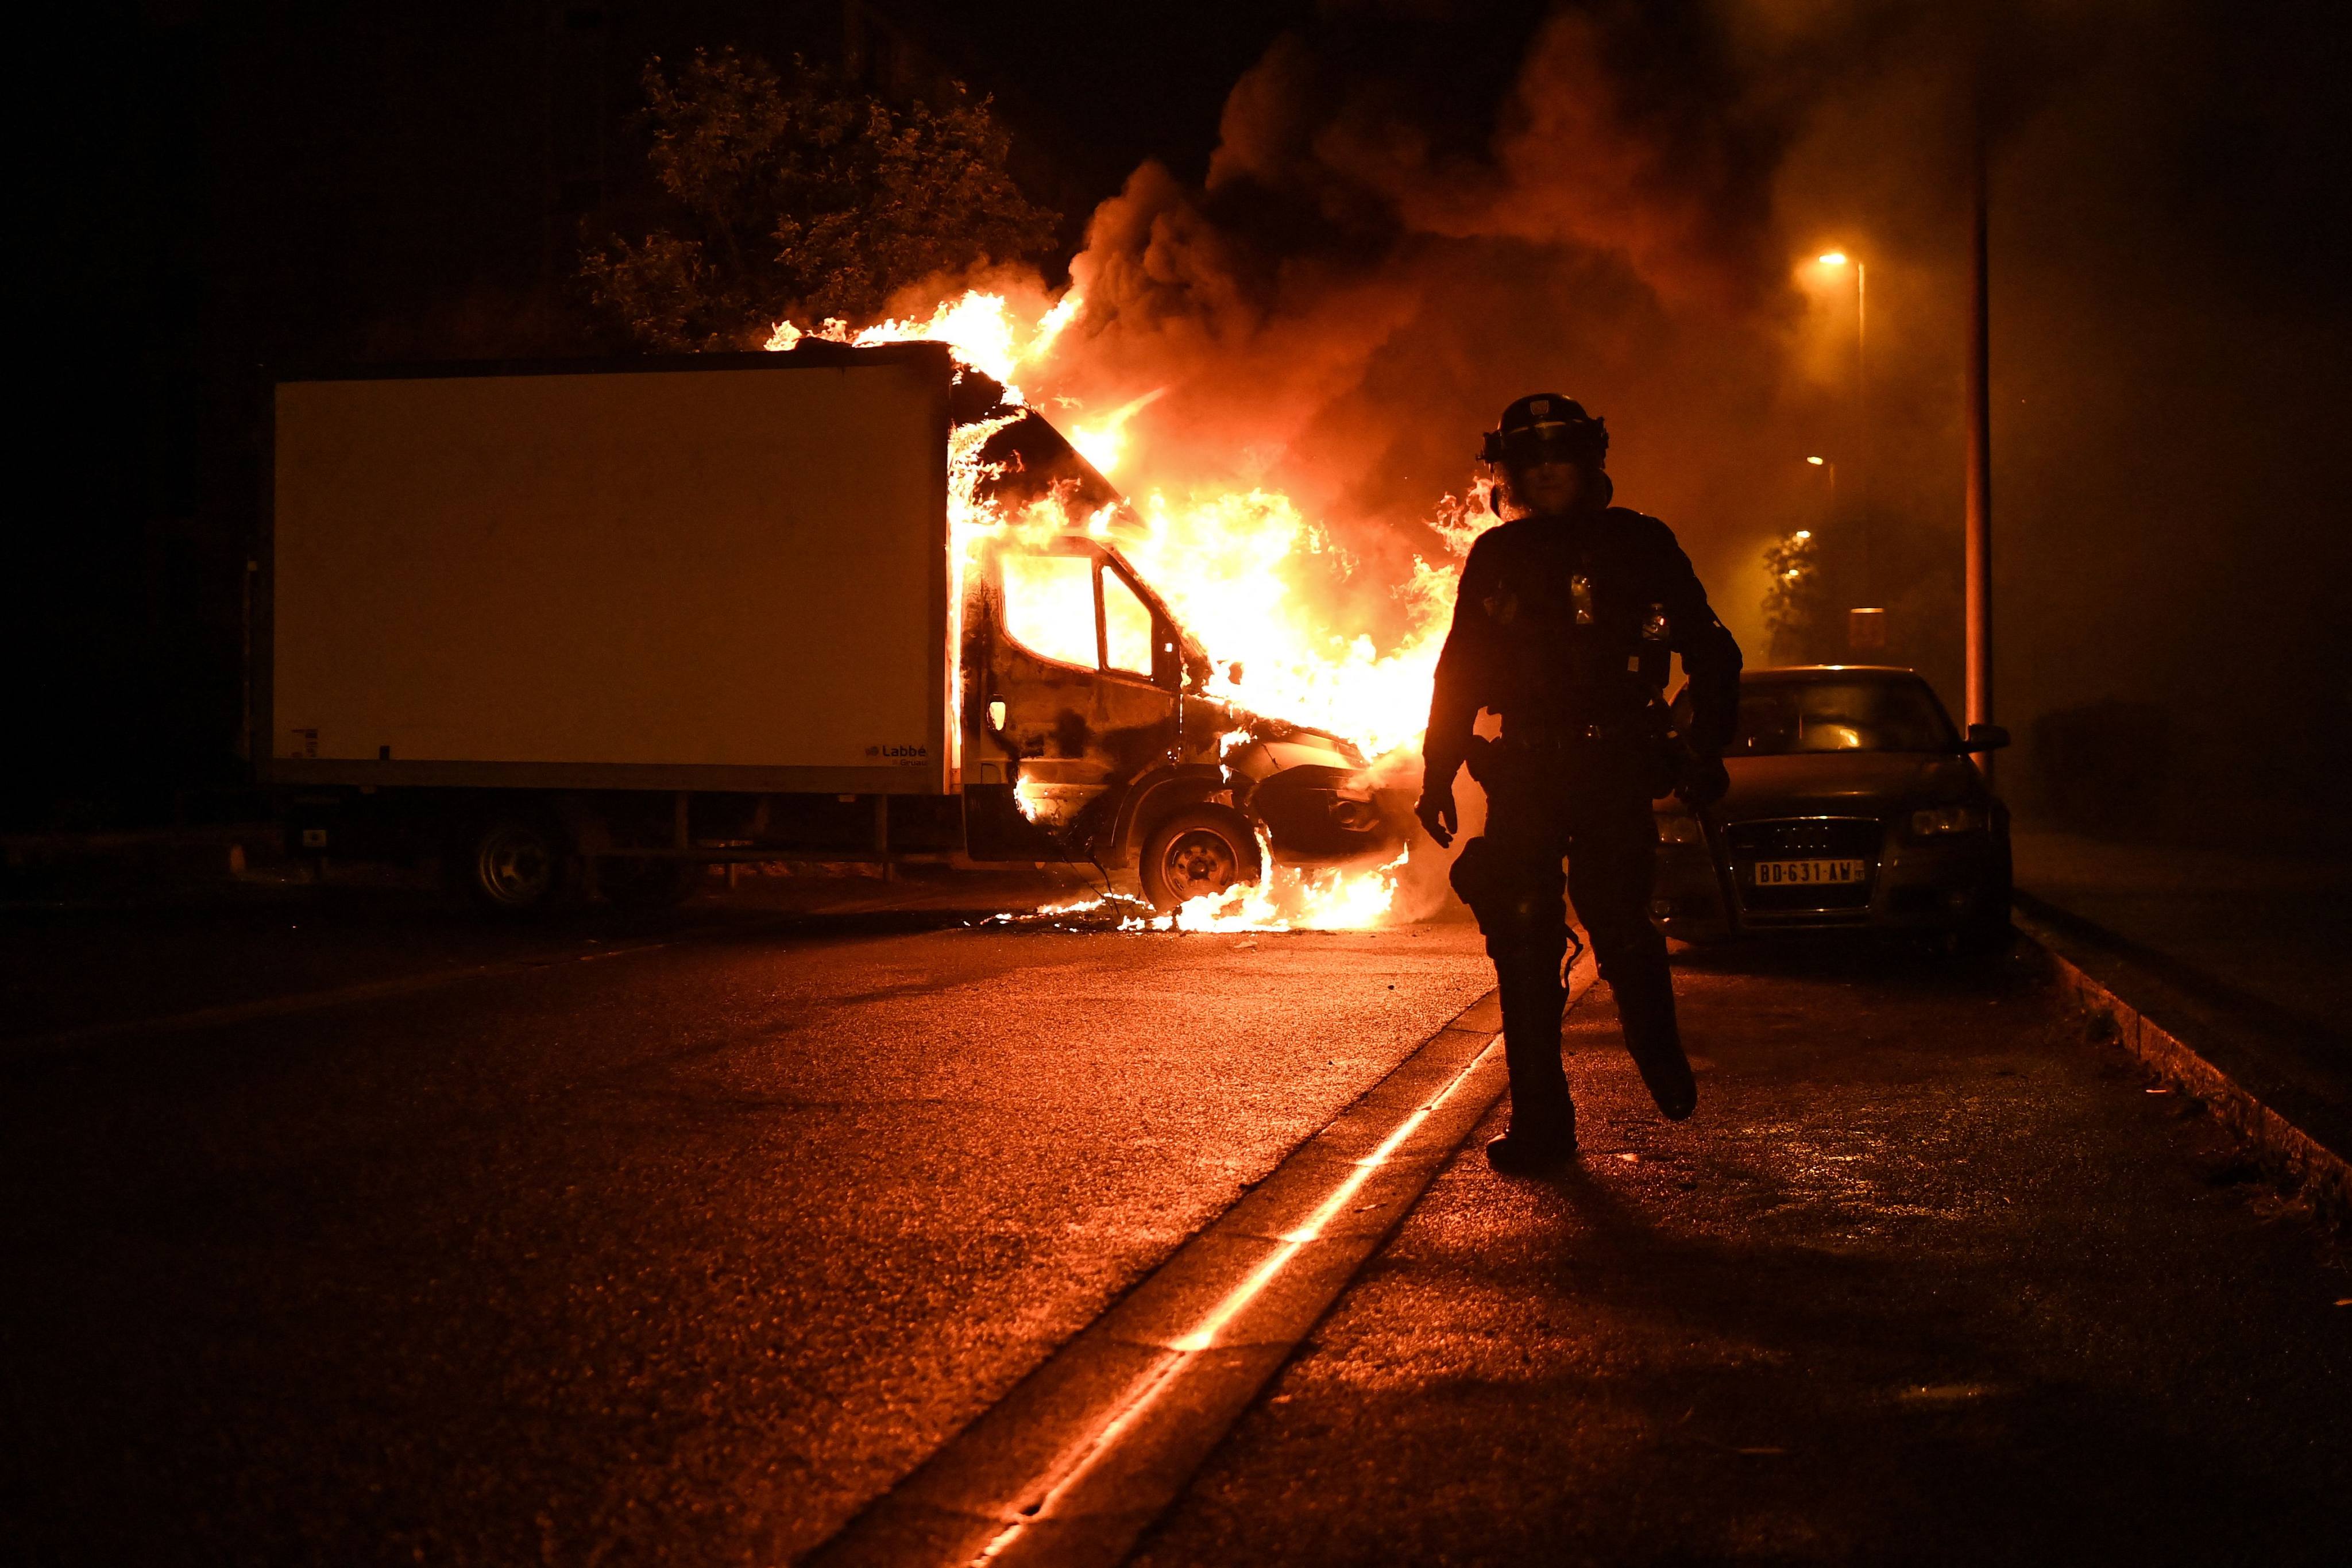 An anti-riot police officer walks past a burning truck in Nantes, western France, on July 1. Photo: AFP